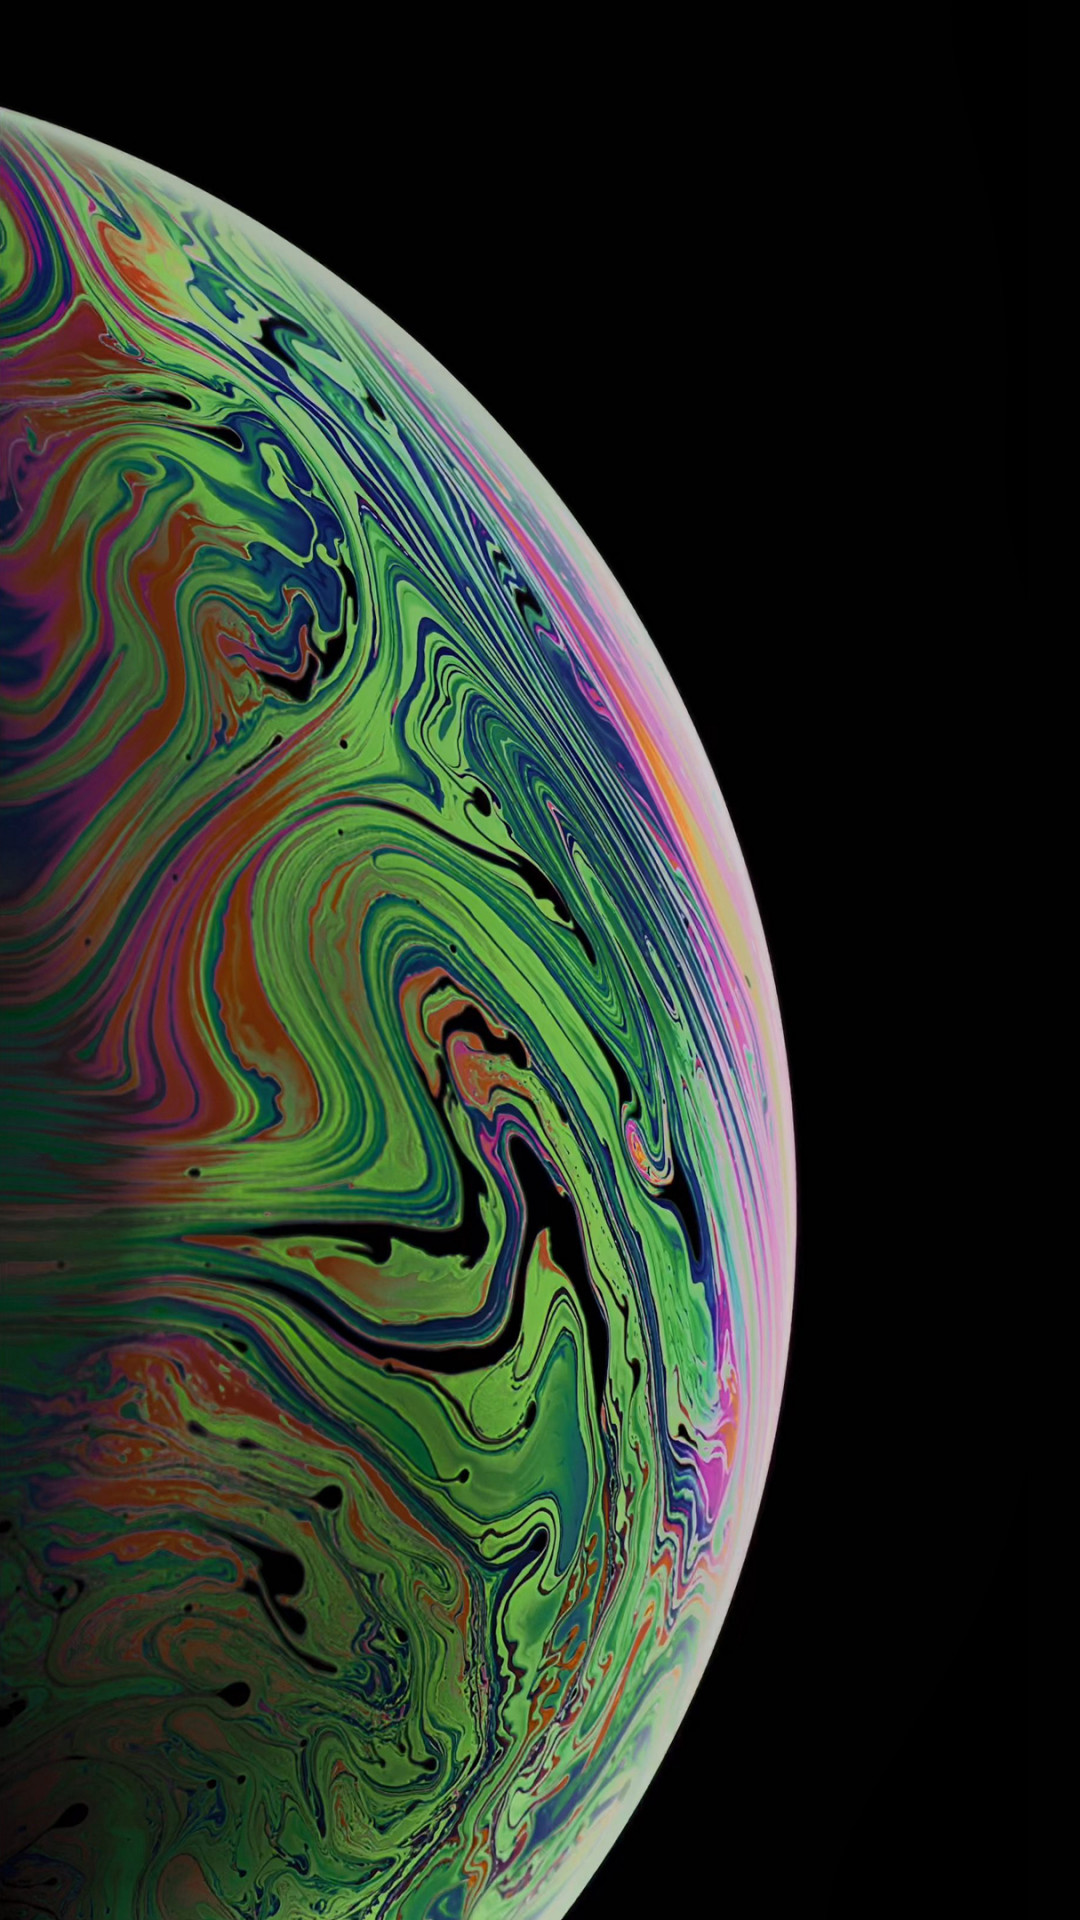 Wallpaper iPhone XS, space gray, 4K, OS #20374